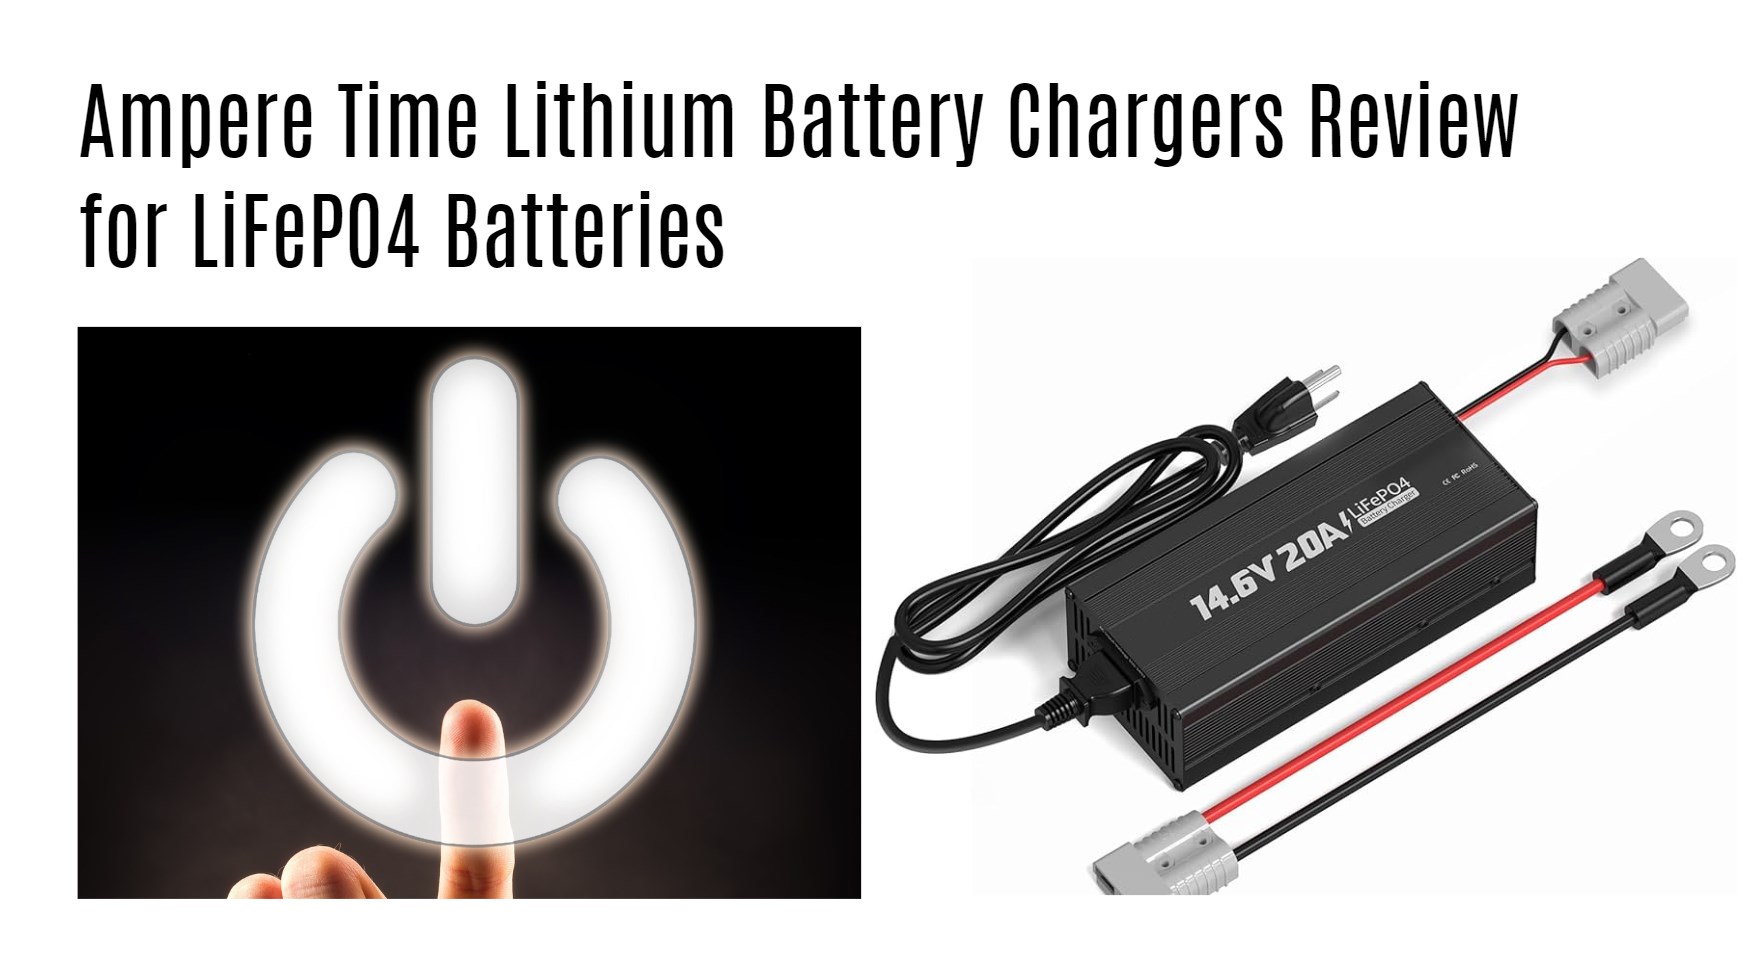 Ampere Time Lithium Battery Chargers Review for LiFePO4 Batteries